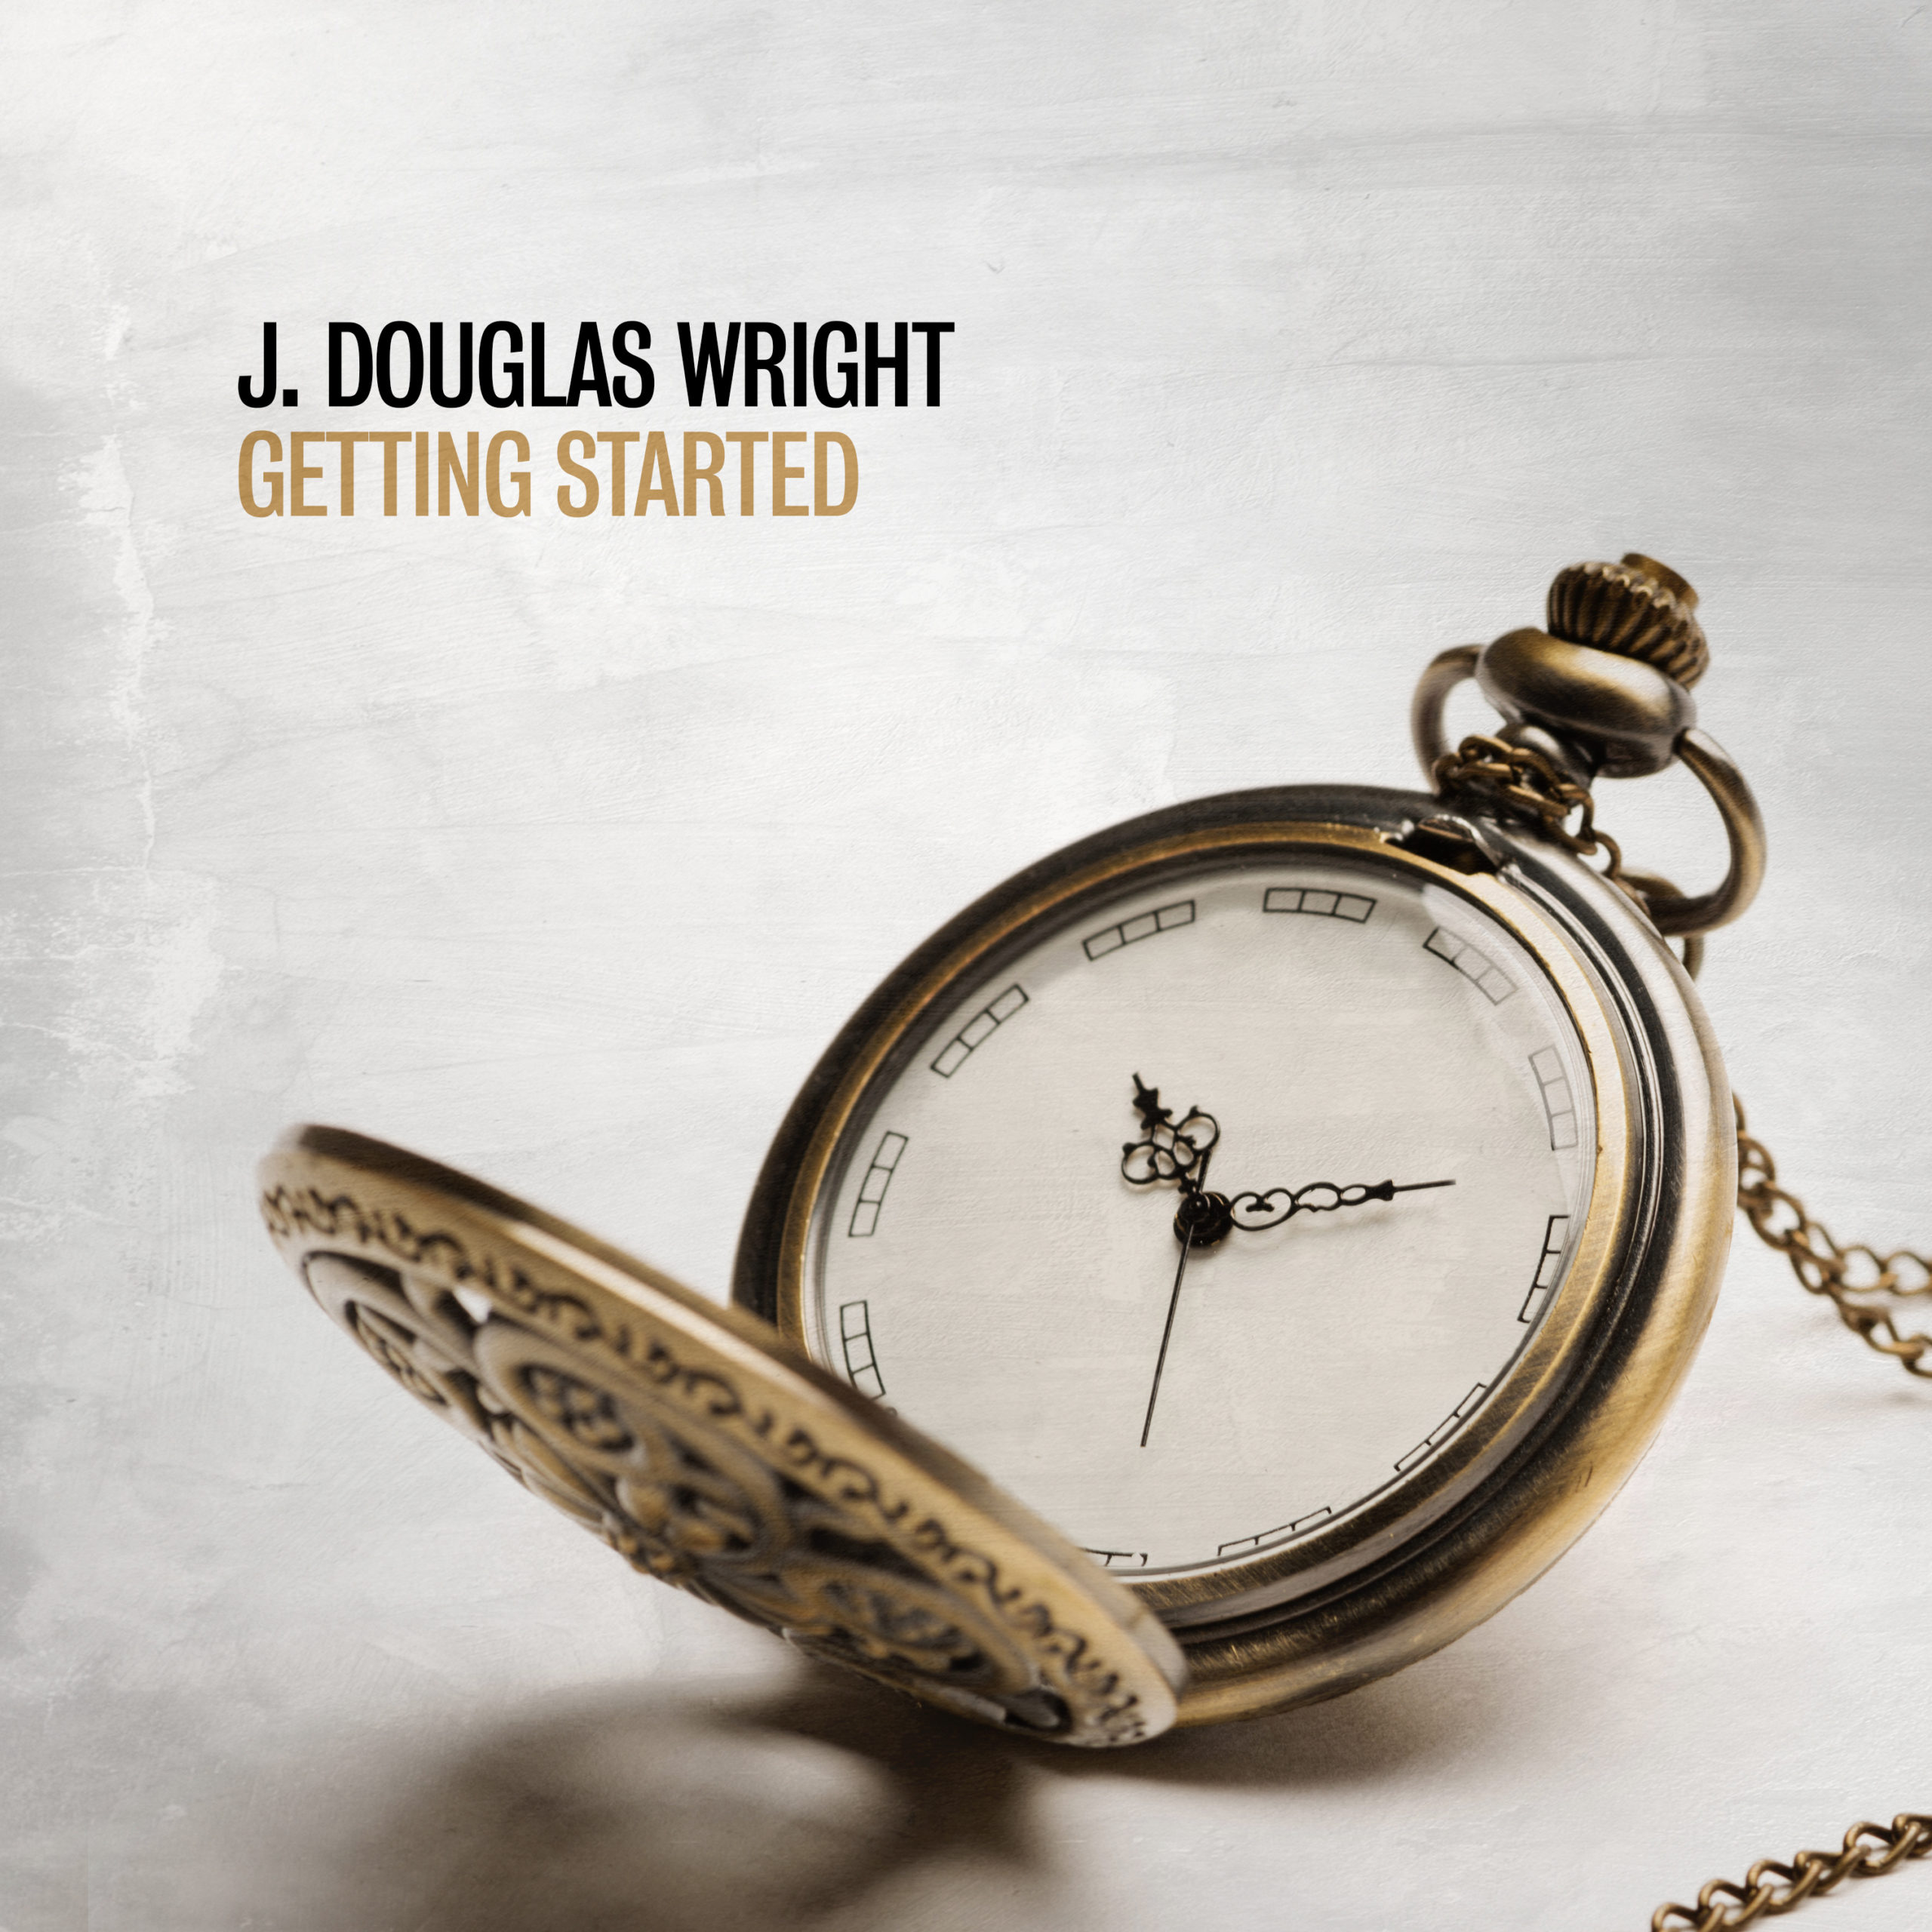 NEW SINGLE OUT TODAY FROM J. DOUGLAS WRIGHT